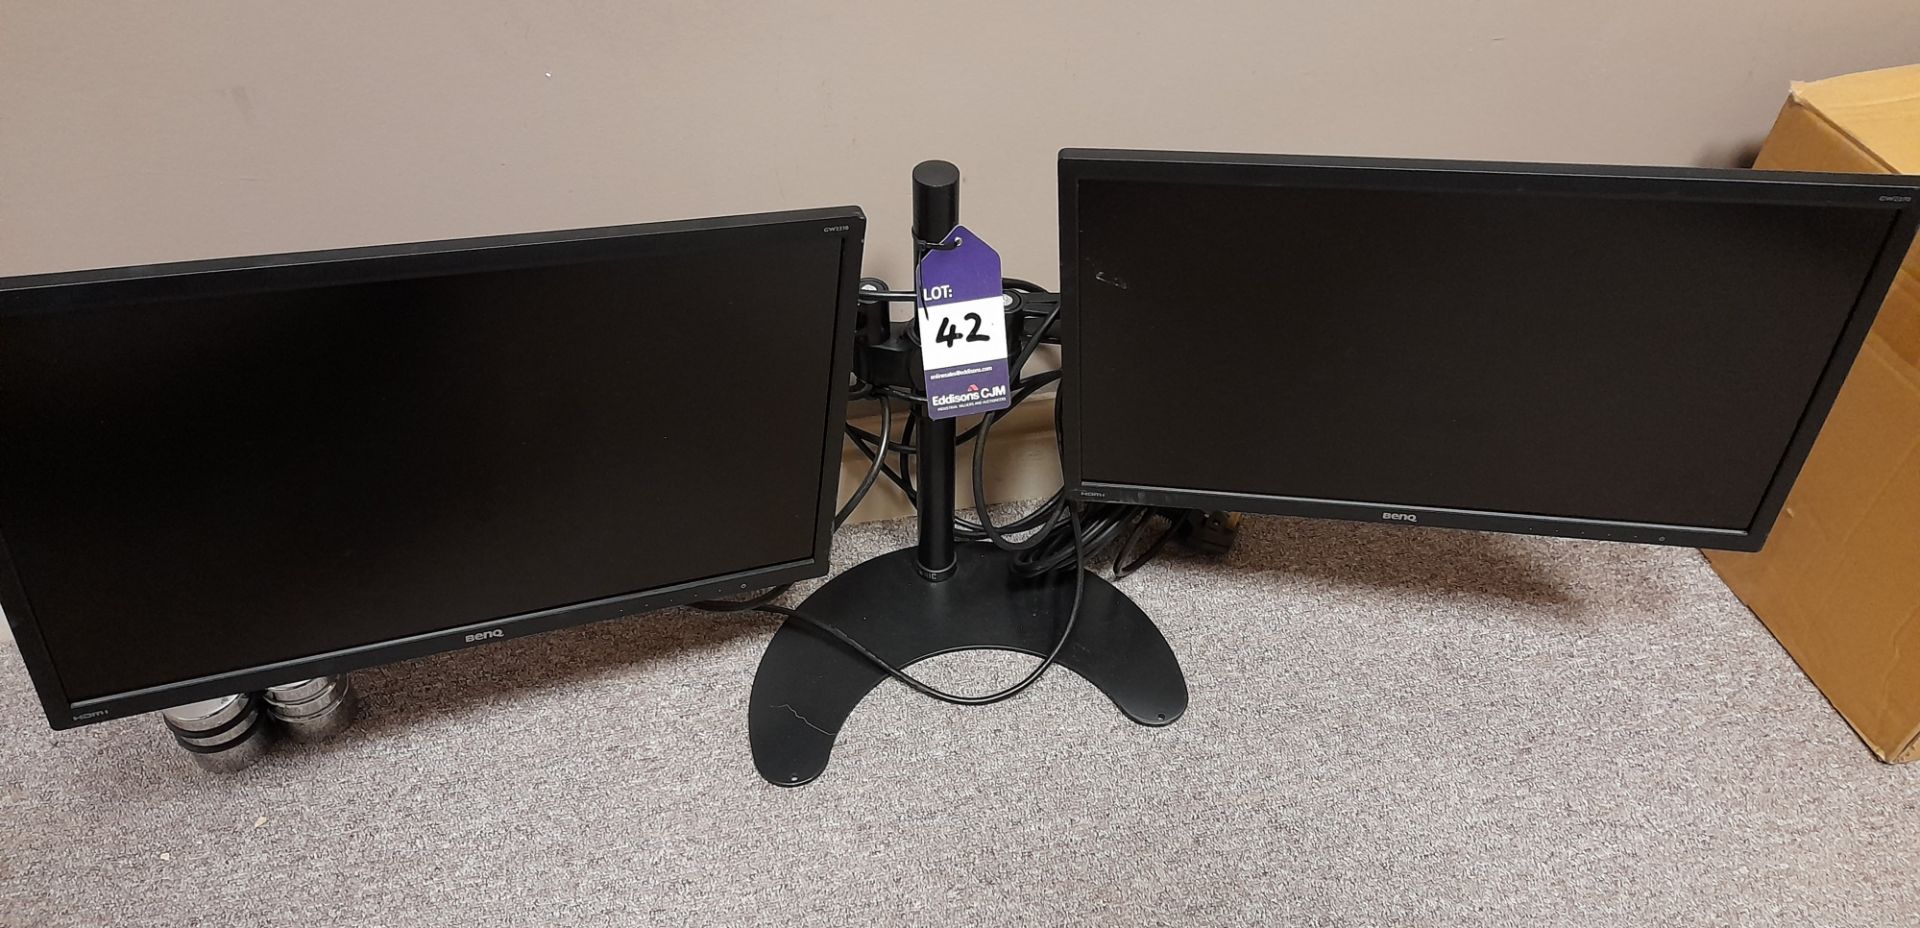 2 x Benq GW2270 monitors, on double stand